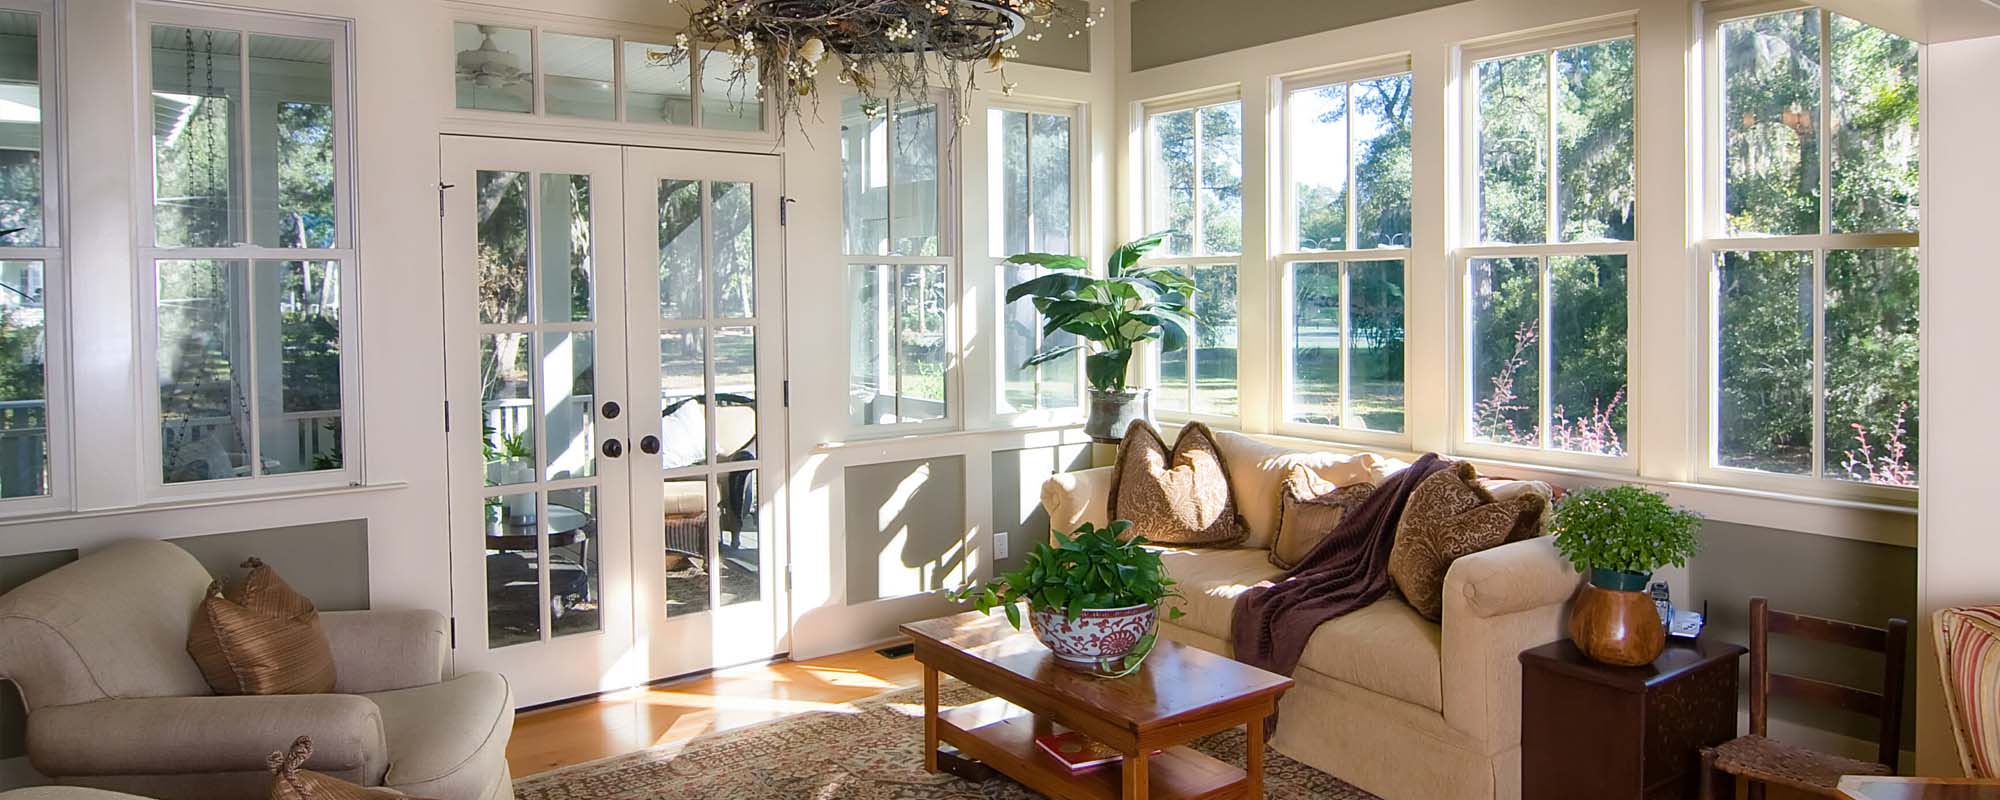 sunroom builder Rumson NJ Top Local Sunroom Builders building luxury sunrooms at the Jersey Shore New Jersey